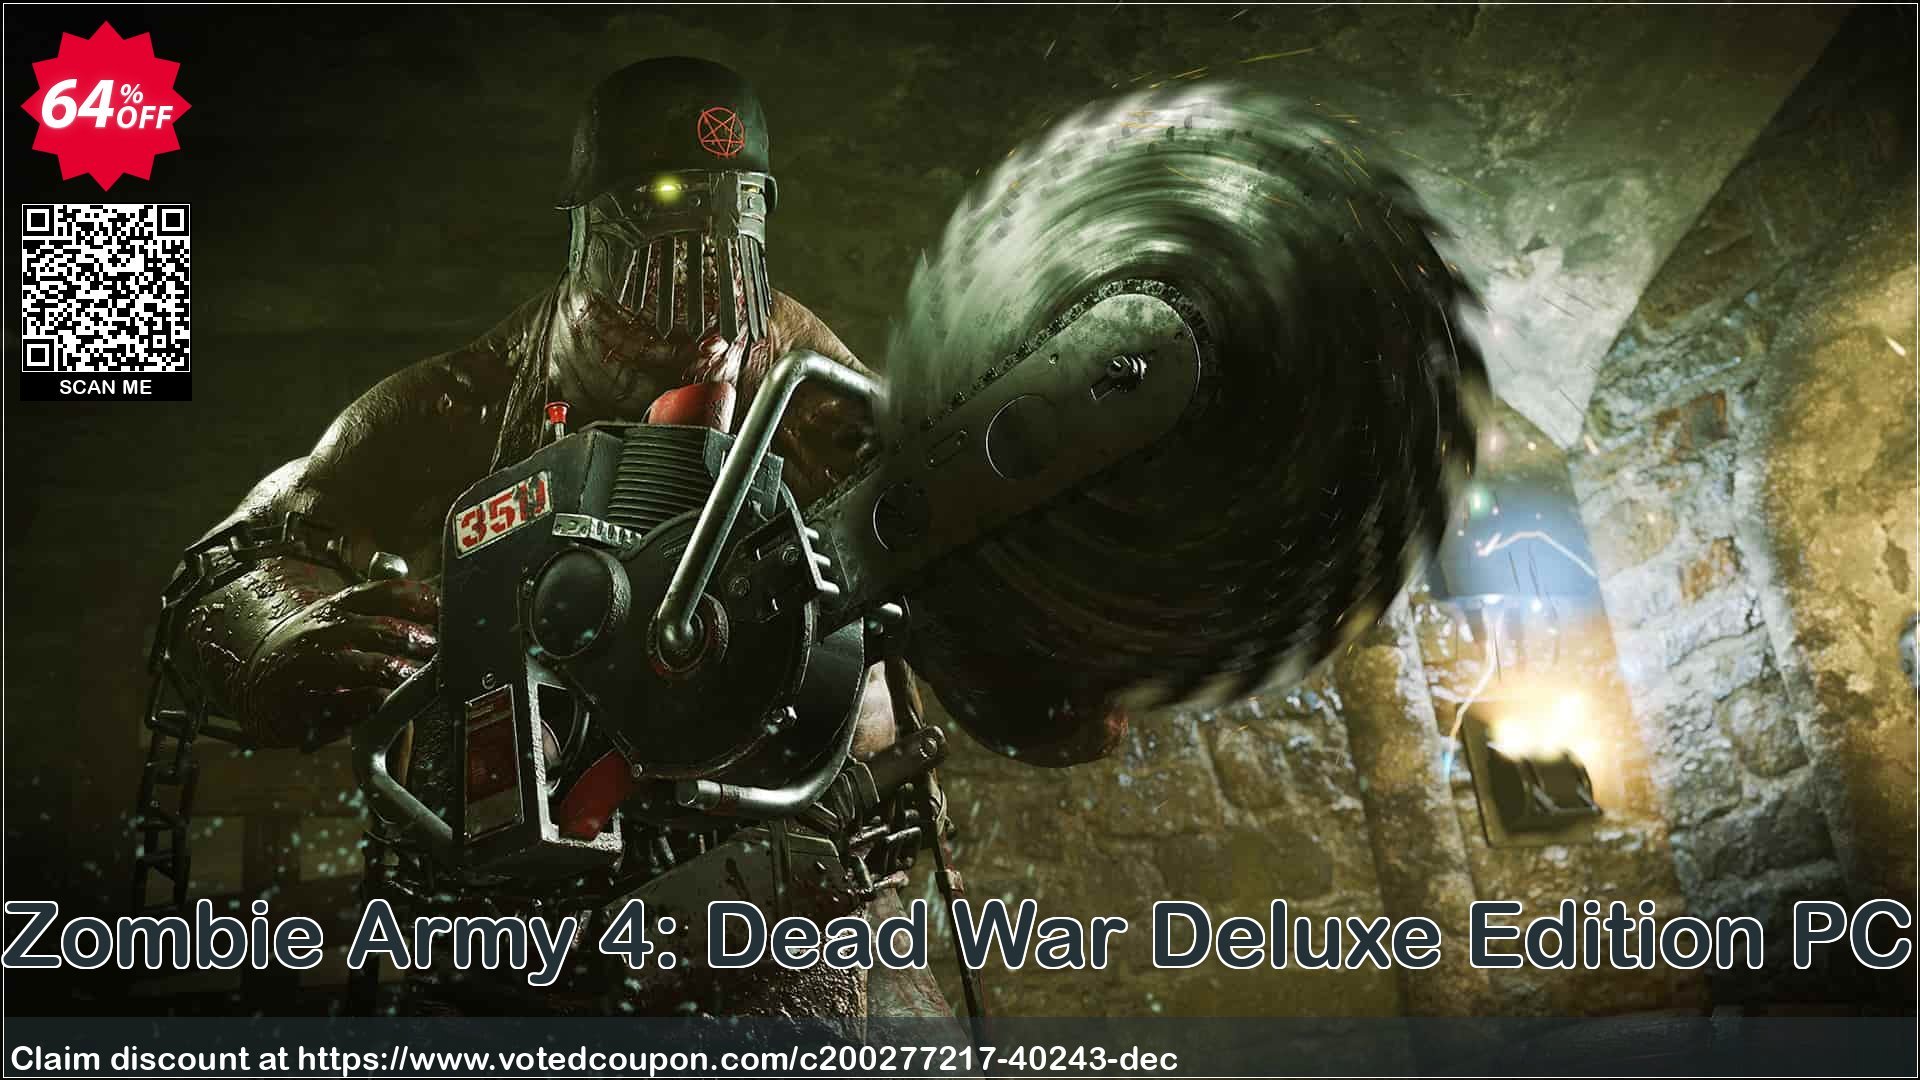 Zombie Army 4: Dead War Deluxe Edition PC Coupon Code May 2024, 64% OFF - VotedCoupon